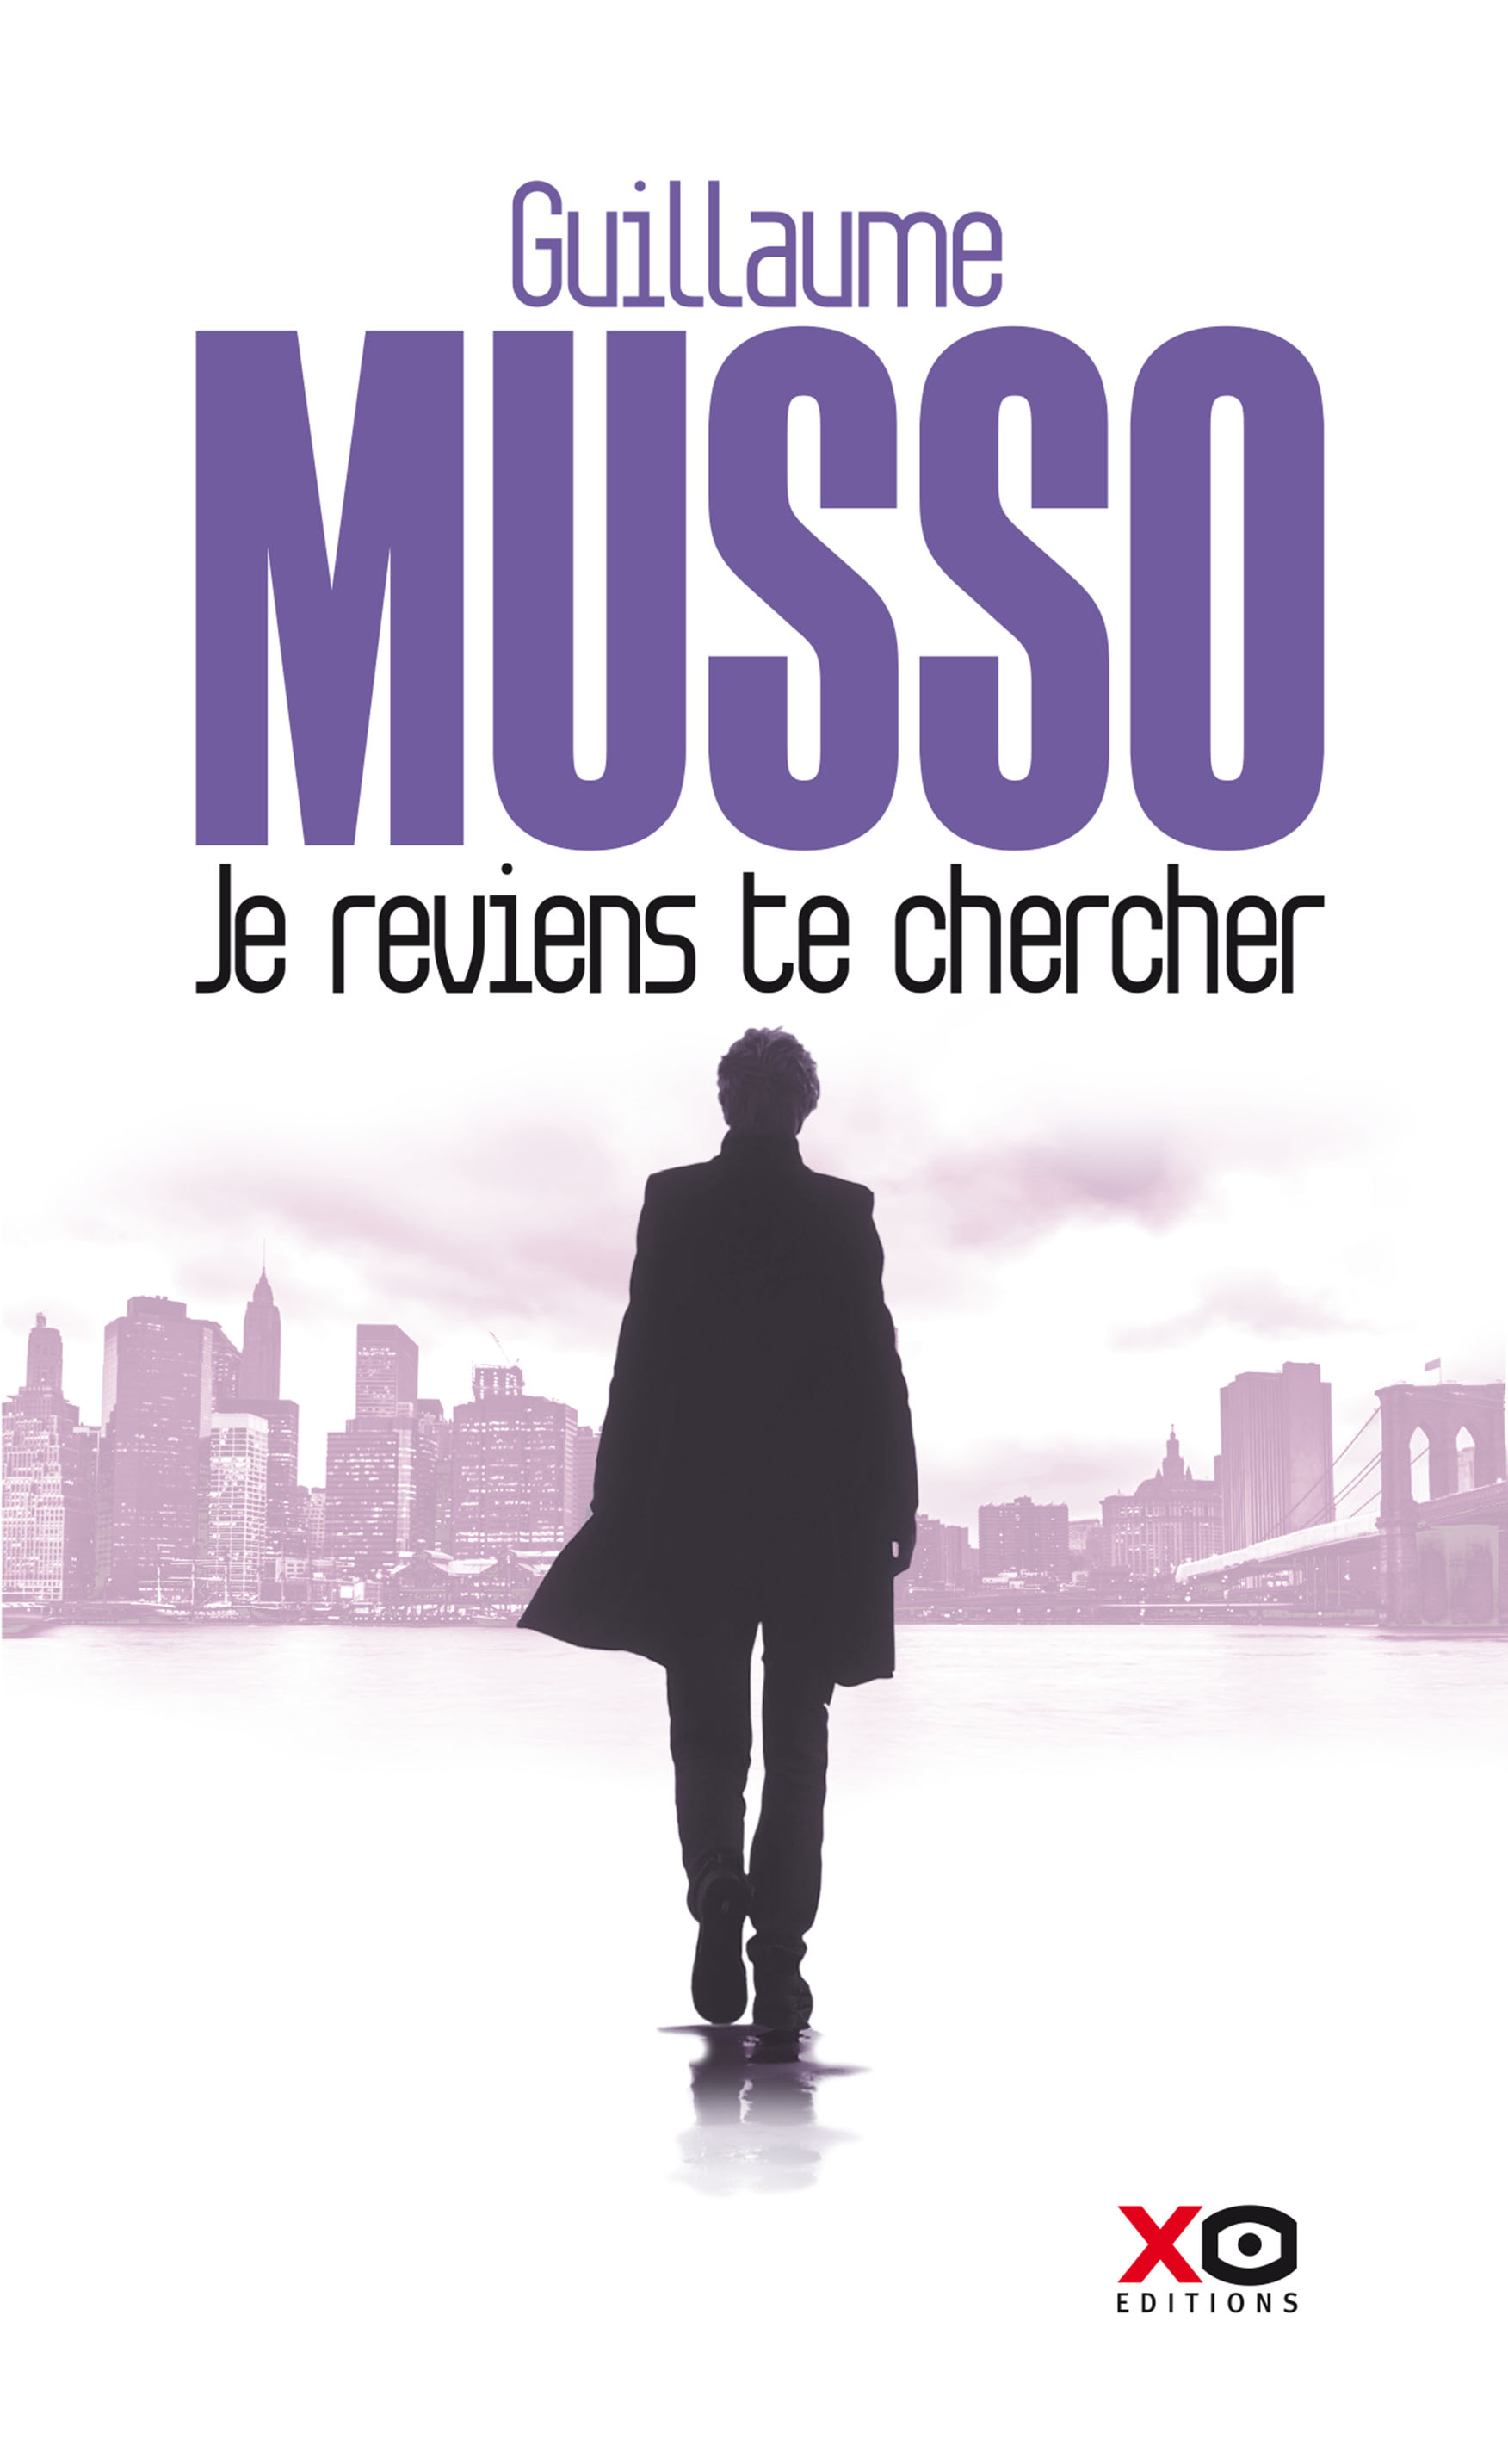 Guillaume Musso